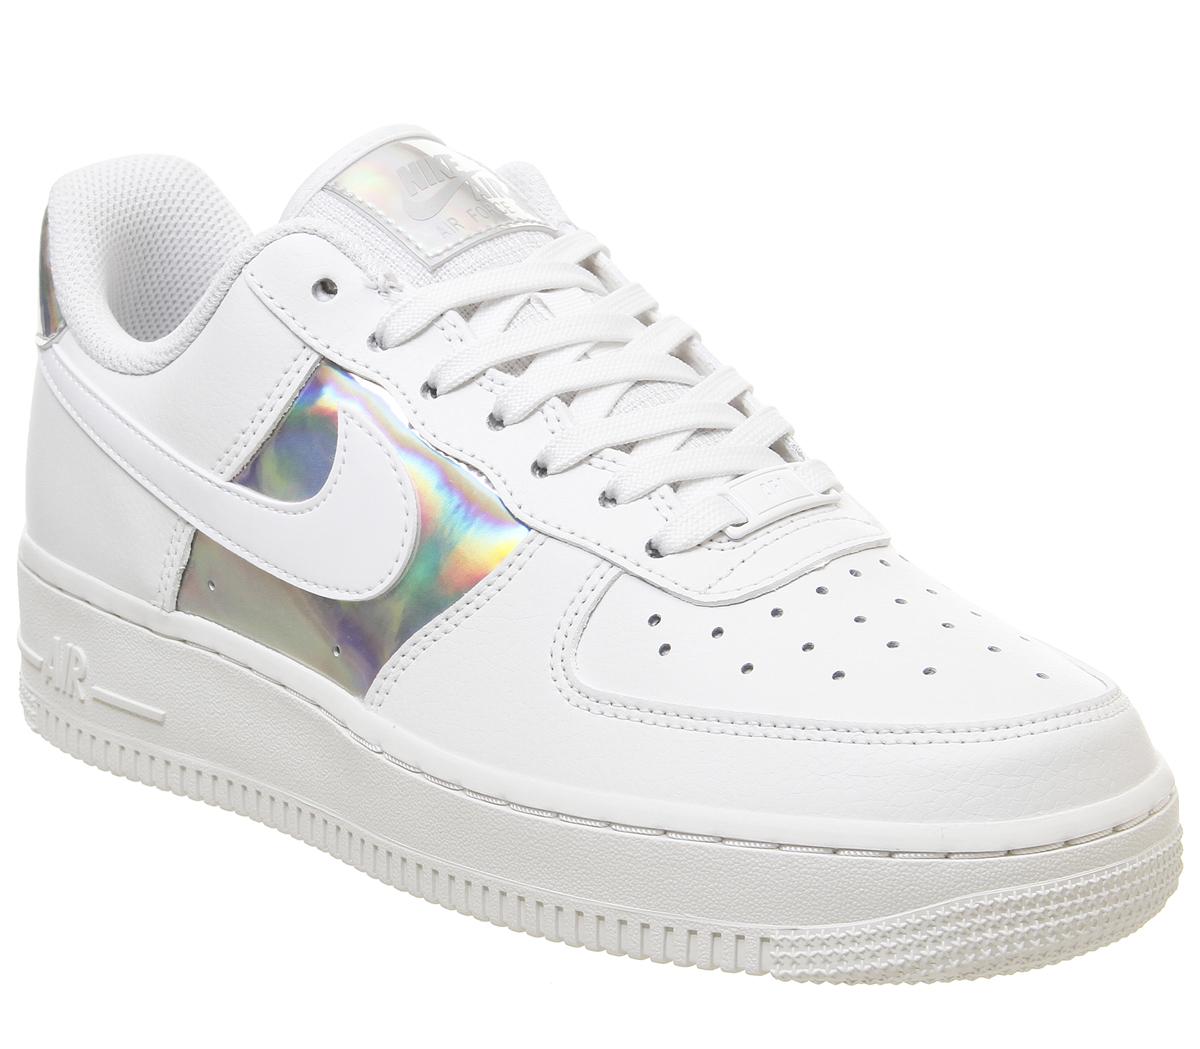 Nike Air Force 1 07 Trainers Summit White Metallic Silver Hers trainers